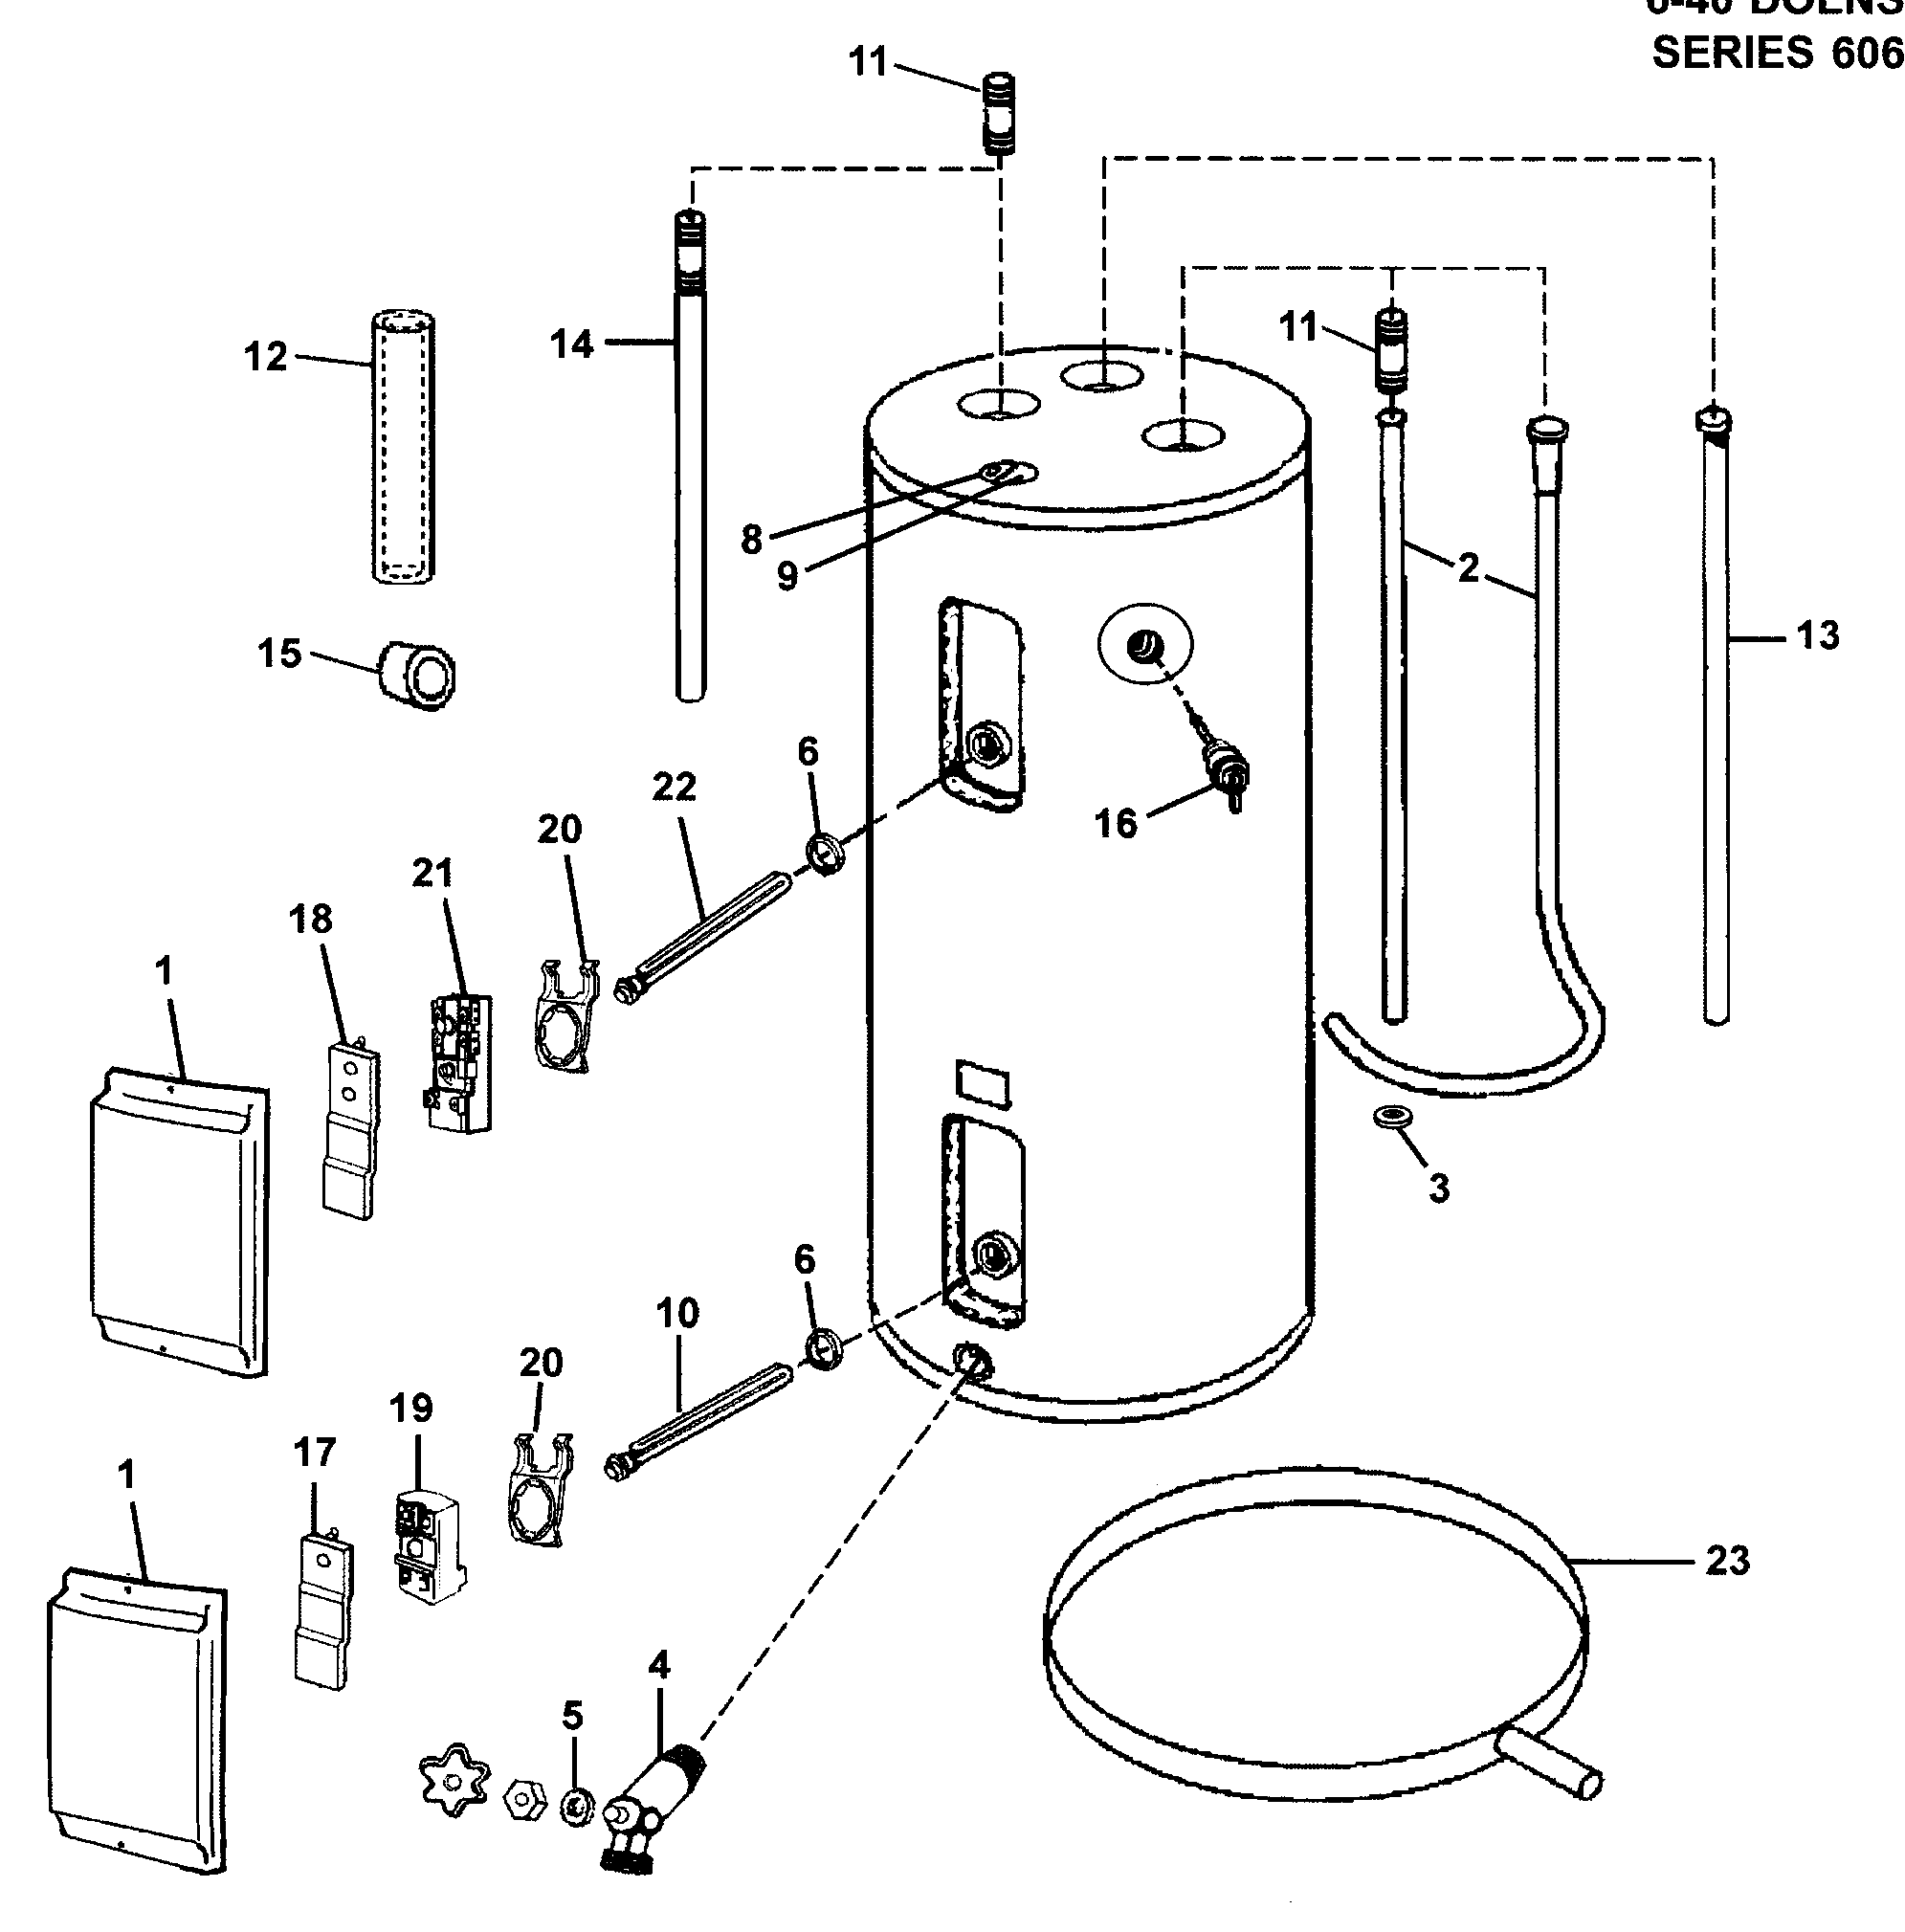 Rheem Hot Water Heater Wiring Diagram from c.searspartsdirect.com